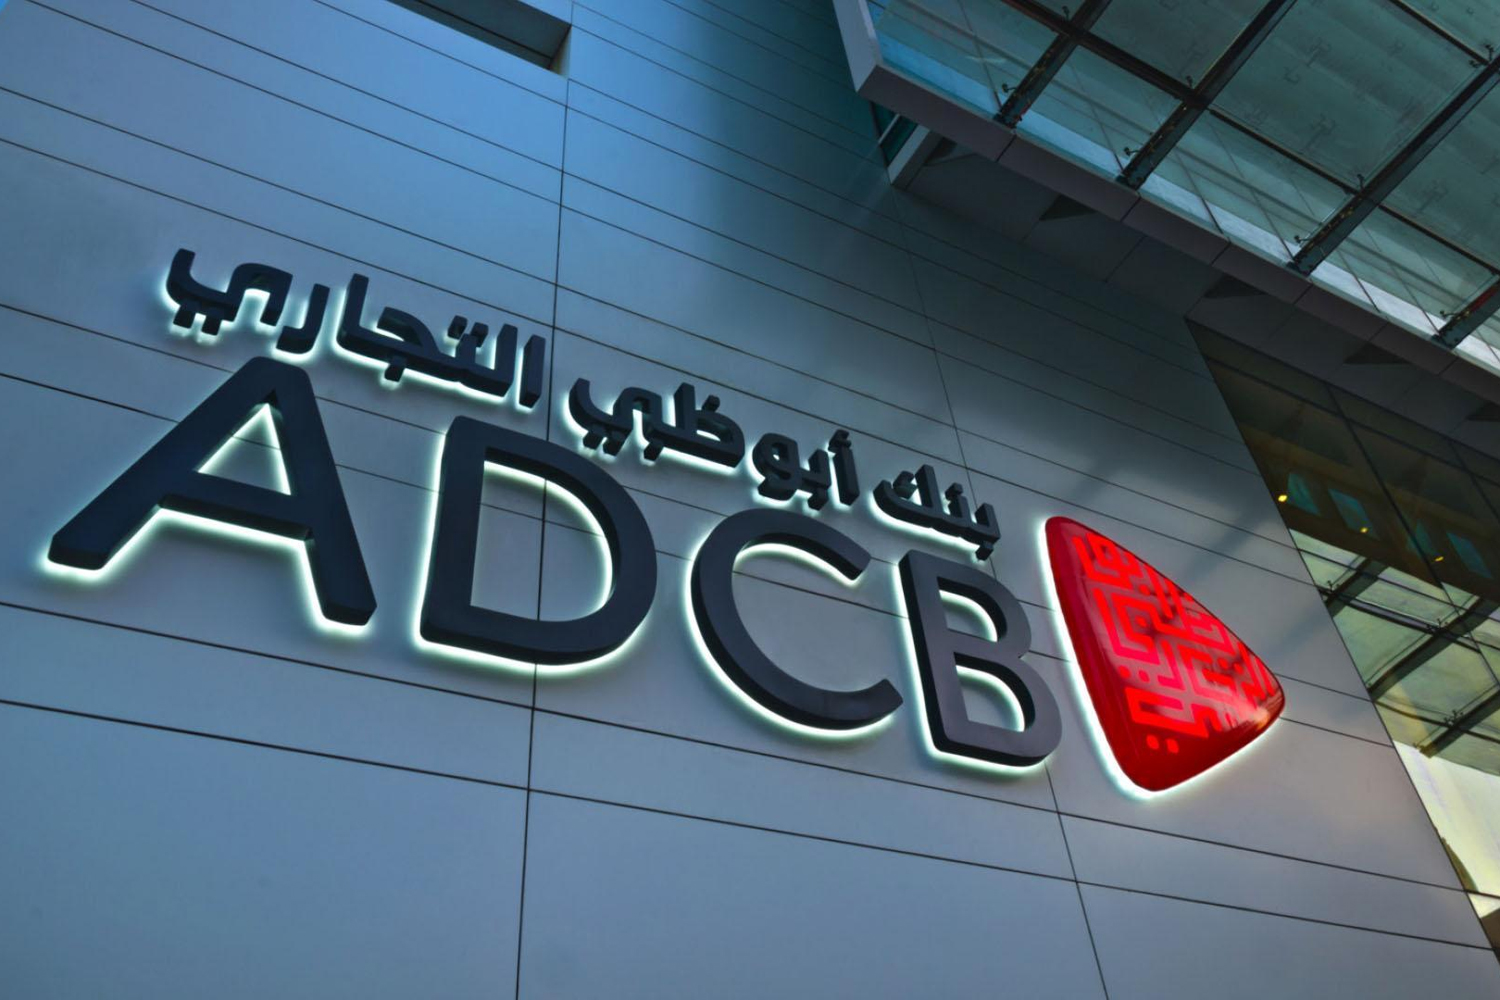 Abu Dhabi’s ADCB to defer loan payments and more to help residents